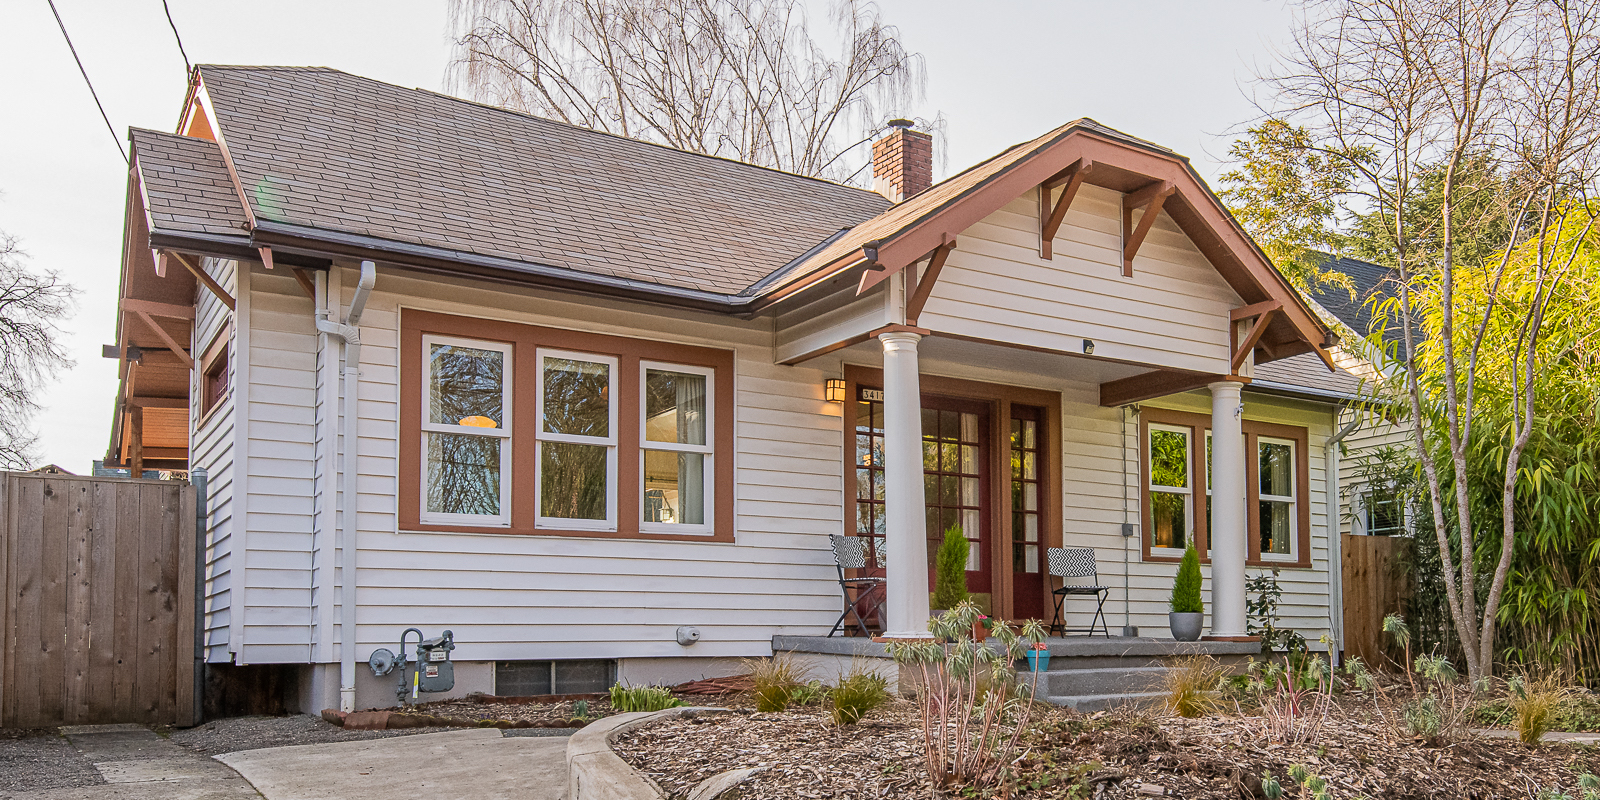 NE PDX Bungalow With A Heart of Gold!